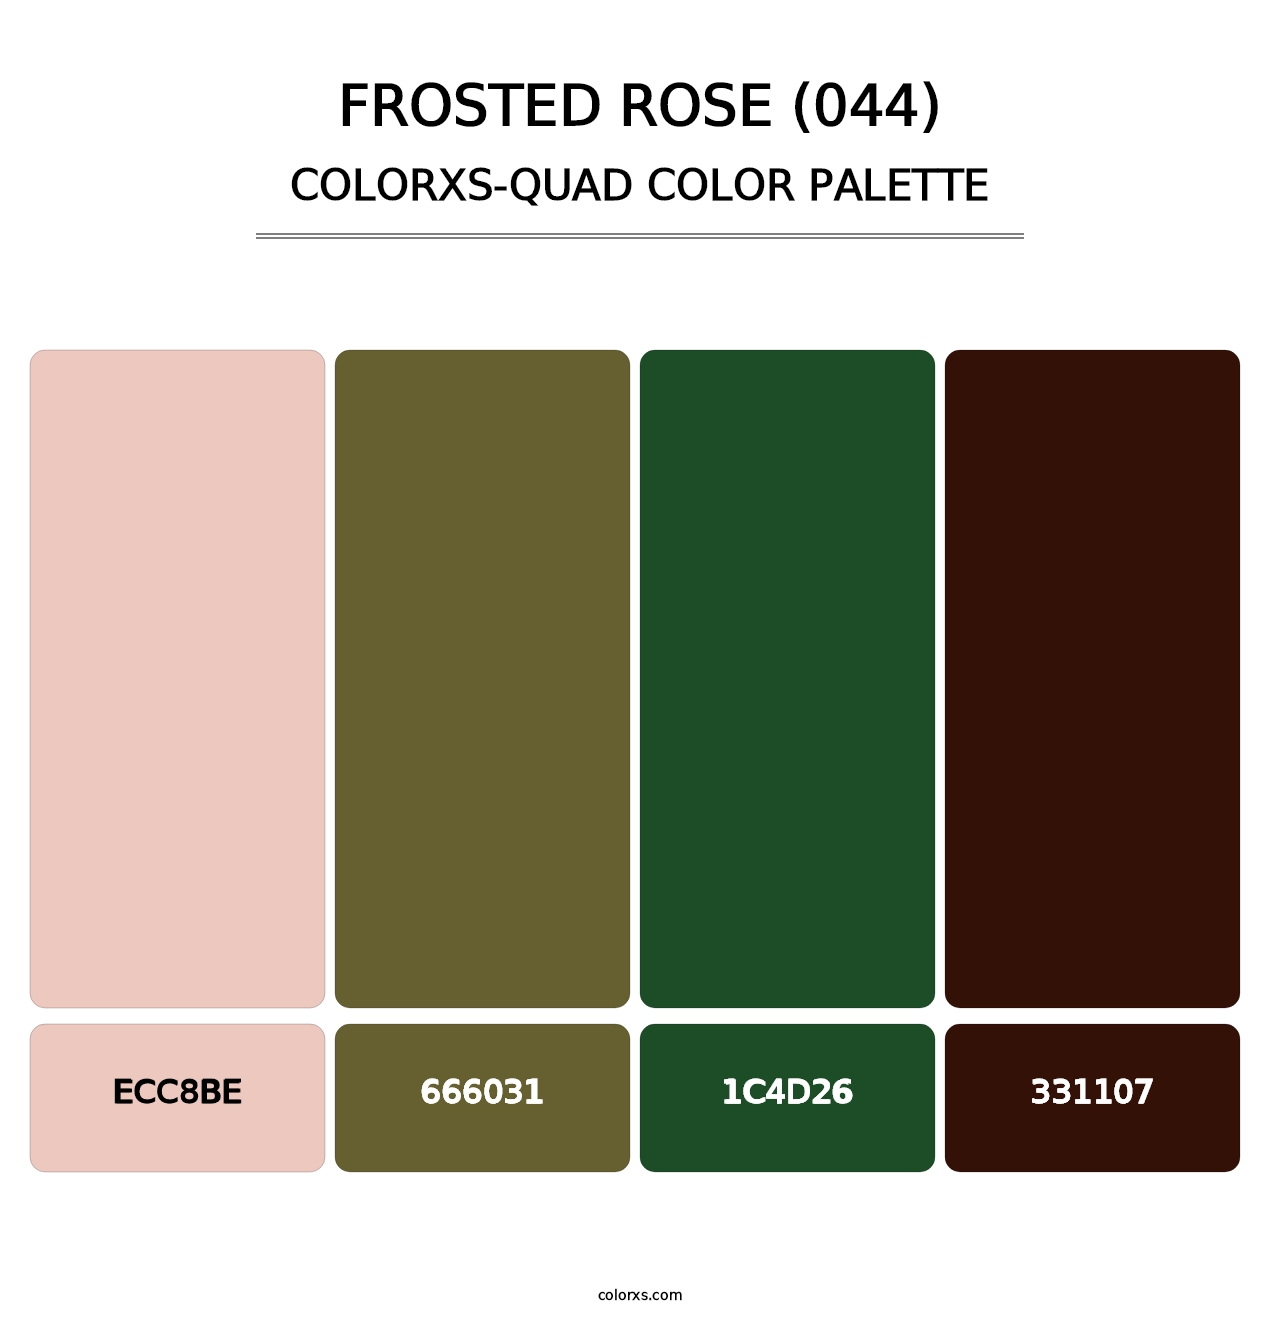 Frosted Rose (044) - Colorxs Quad Palette